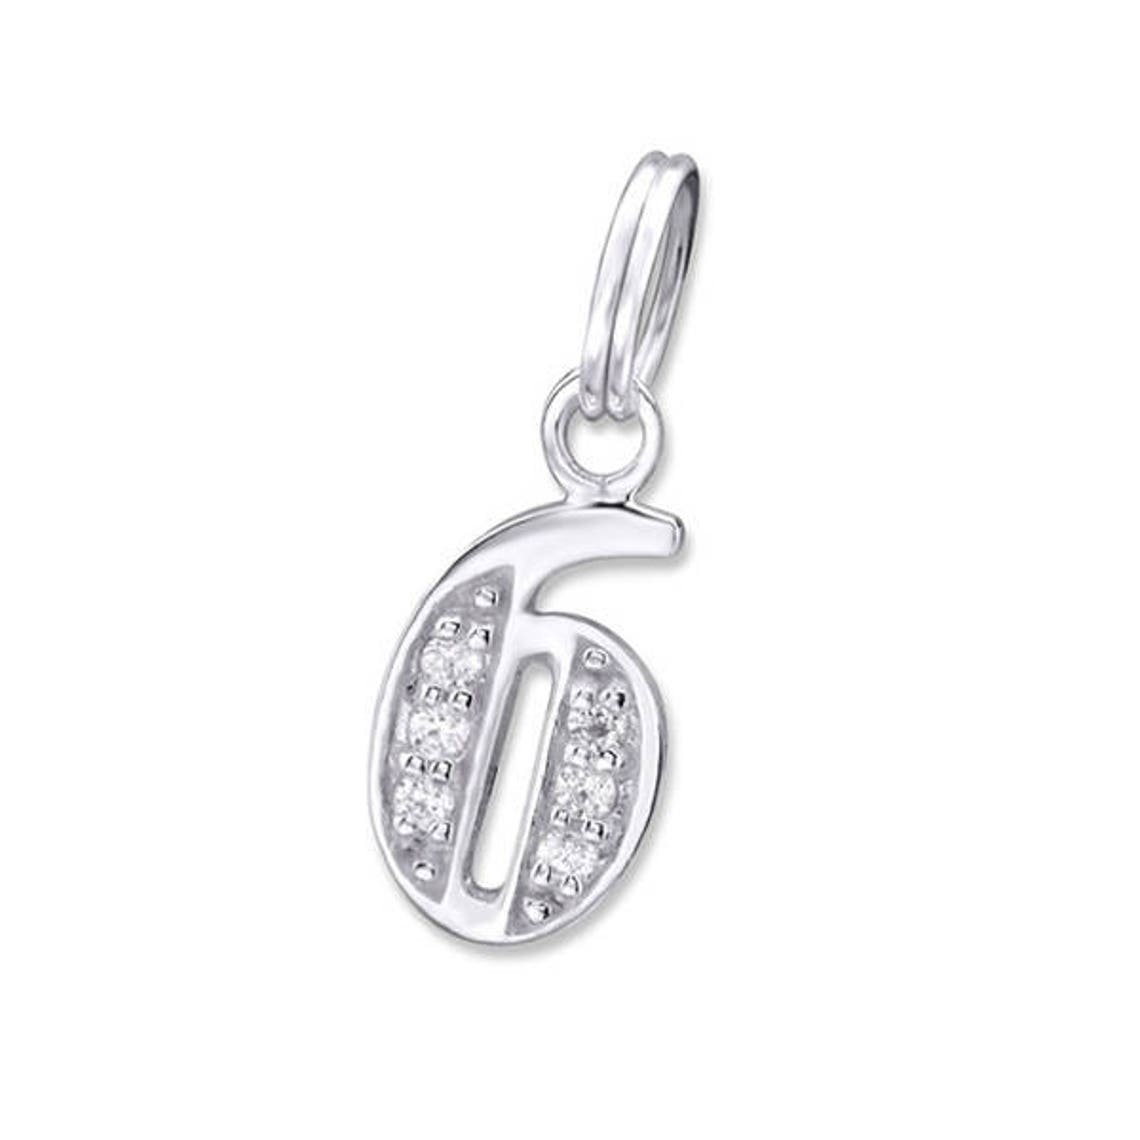 Silver Cubic Zirconia Number Charm Dangles Fits Pandora - Etsy